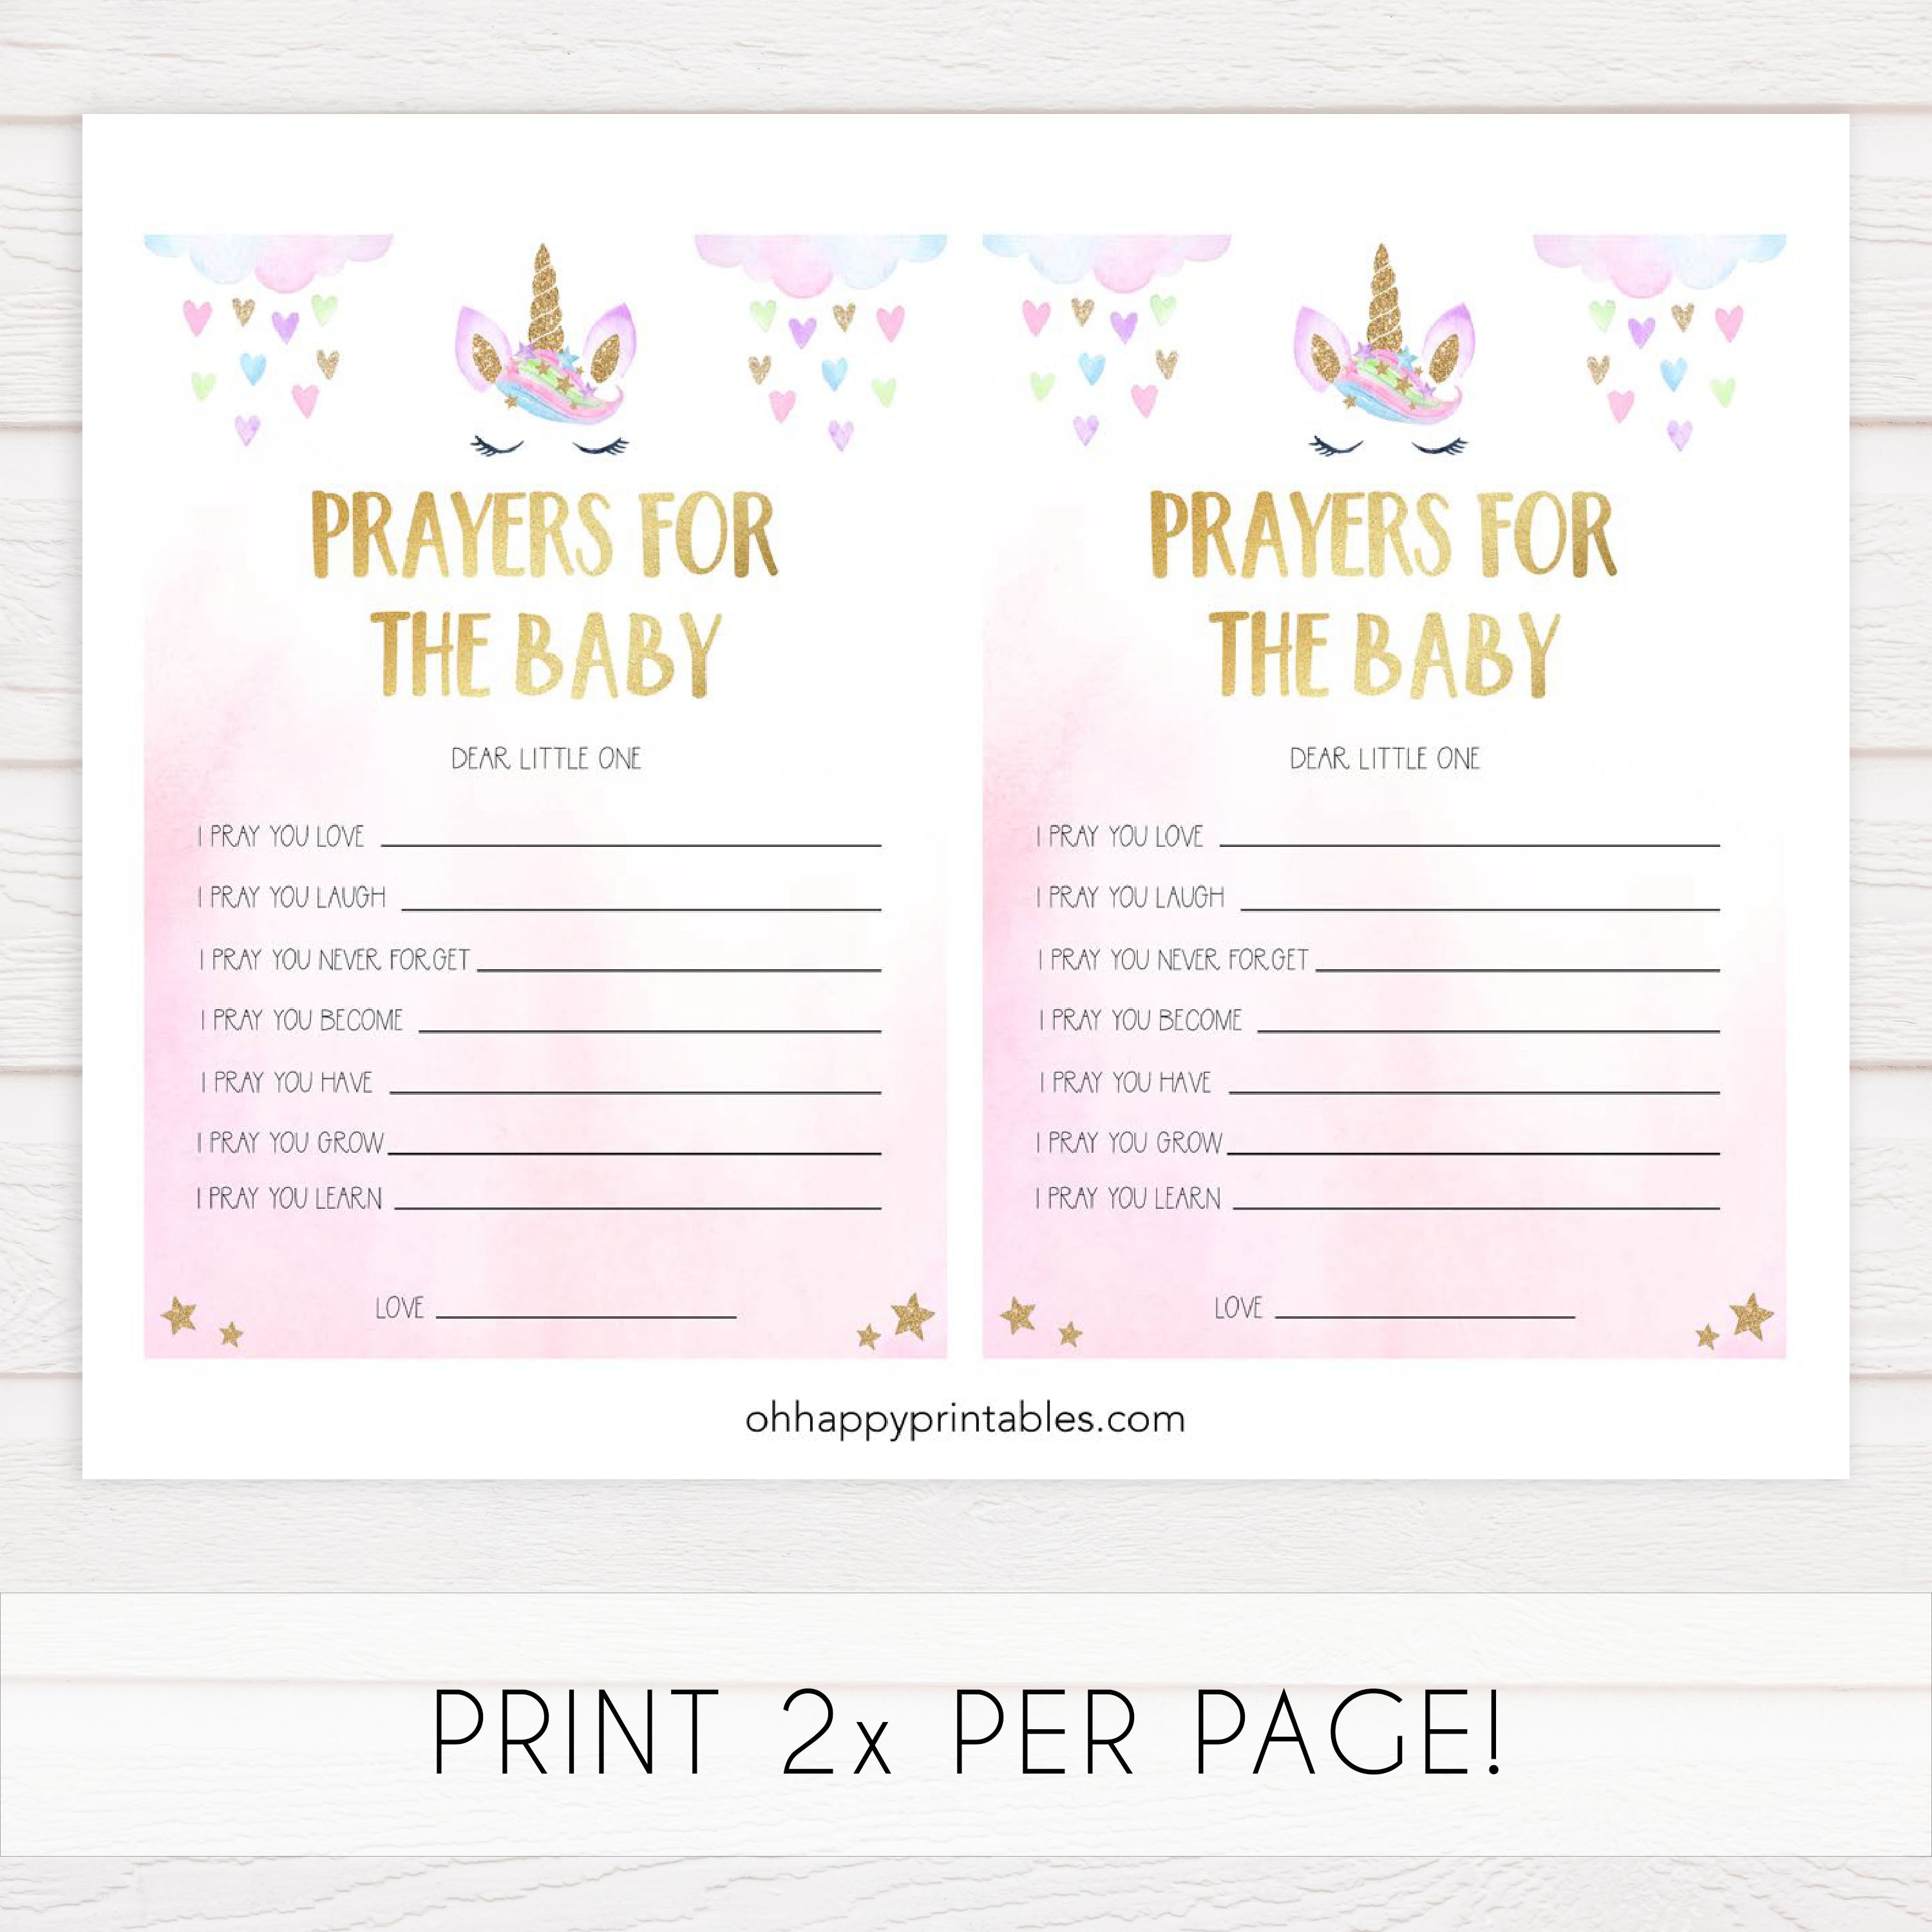 prayers for the baby game, Printable baby shower games, unicorn baby games, baby shower games, fun baby shower ideas, top baby shower ideas, unicorn baby shower, baby shower games, fun unicorn baby shower ideas